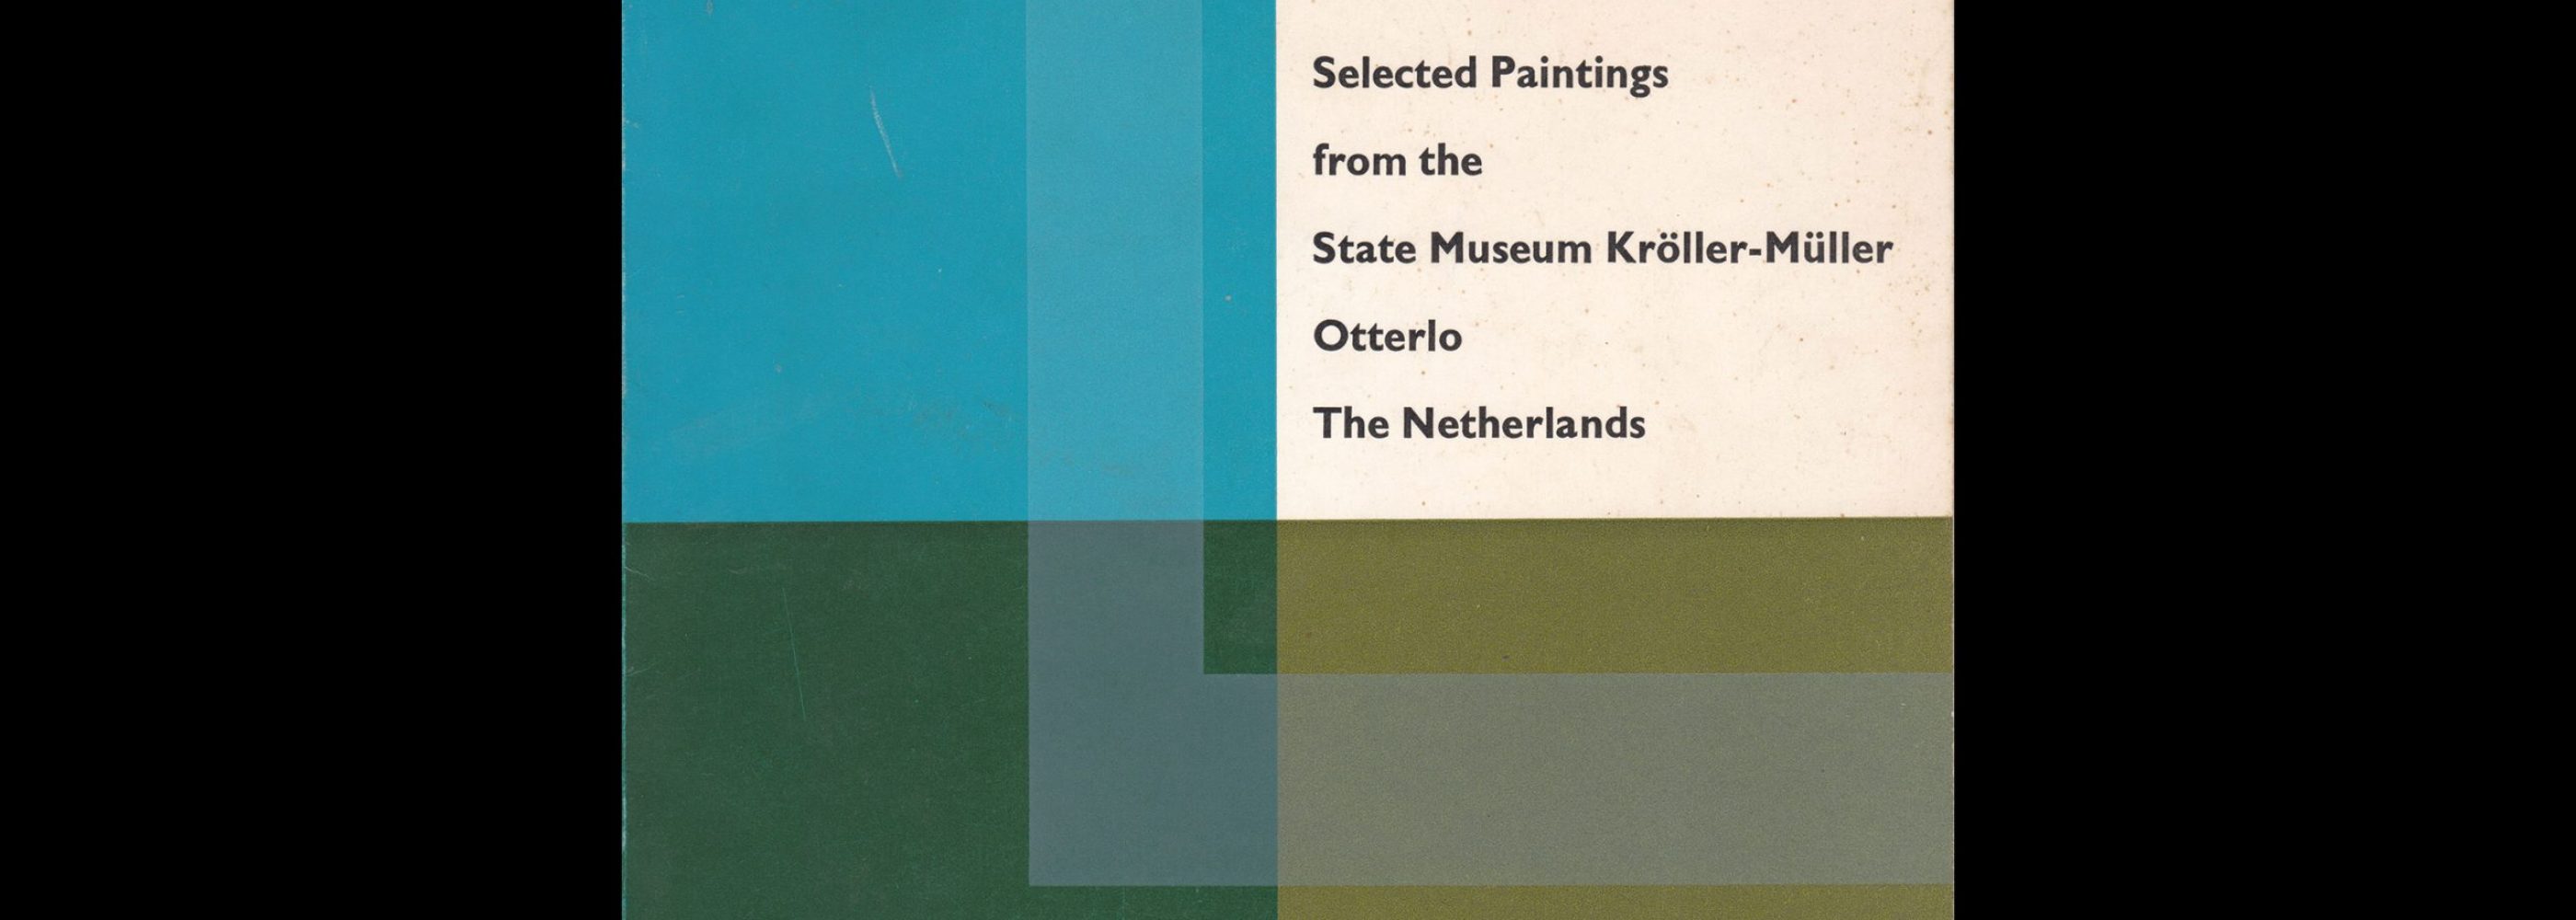 Selected Paintings from the State Museum, Kröller-Müller Otterlo, The Netherlands, 1962. Designed by Otto Truemann